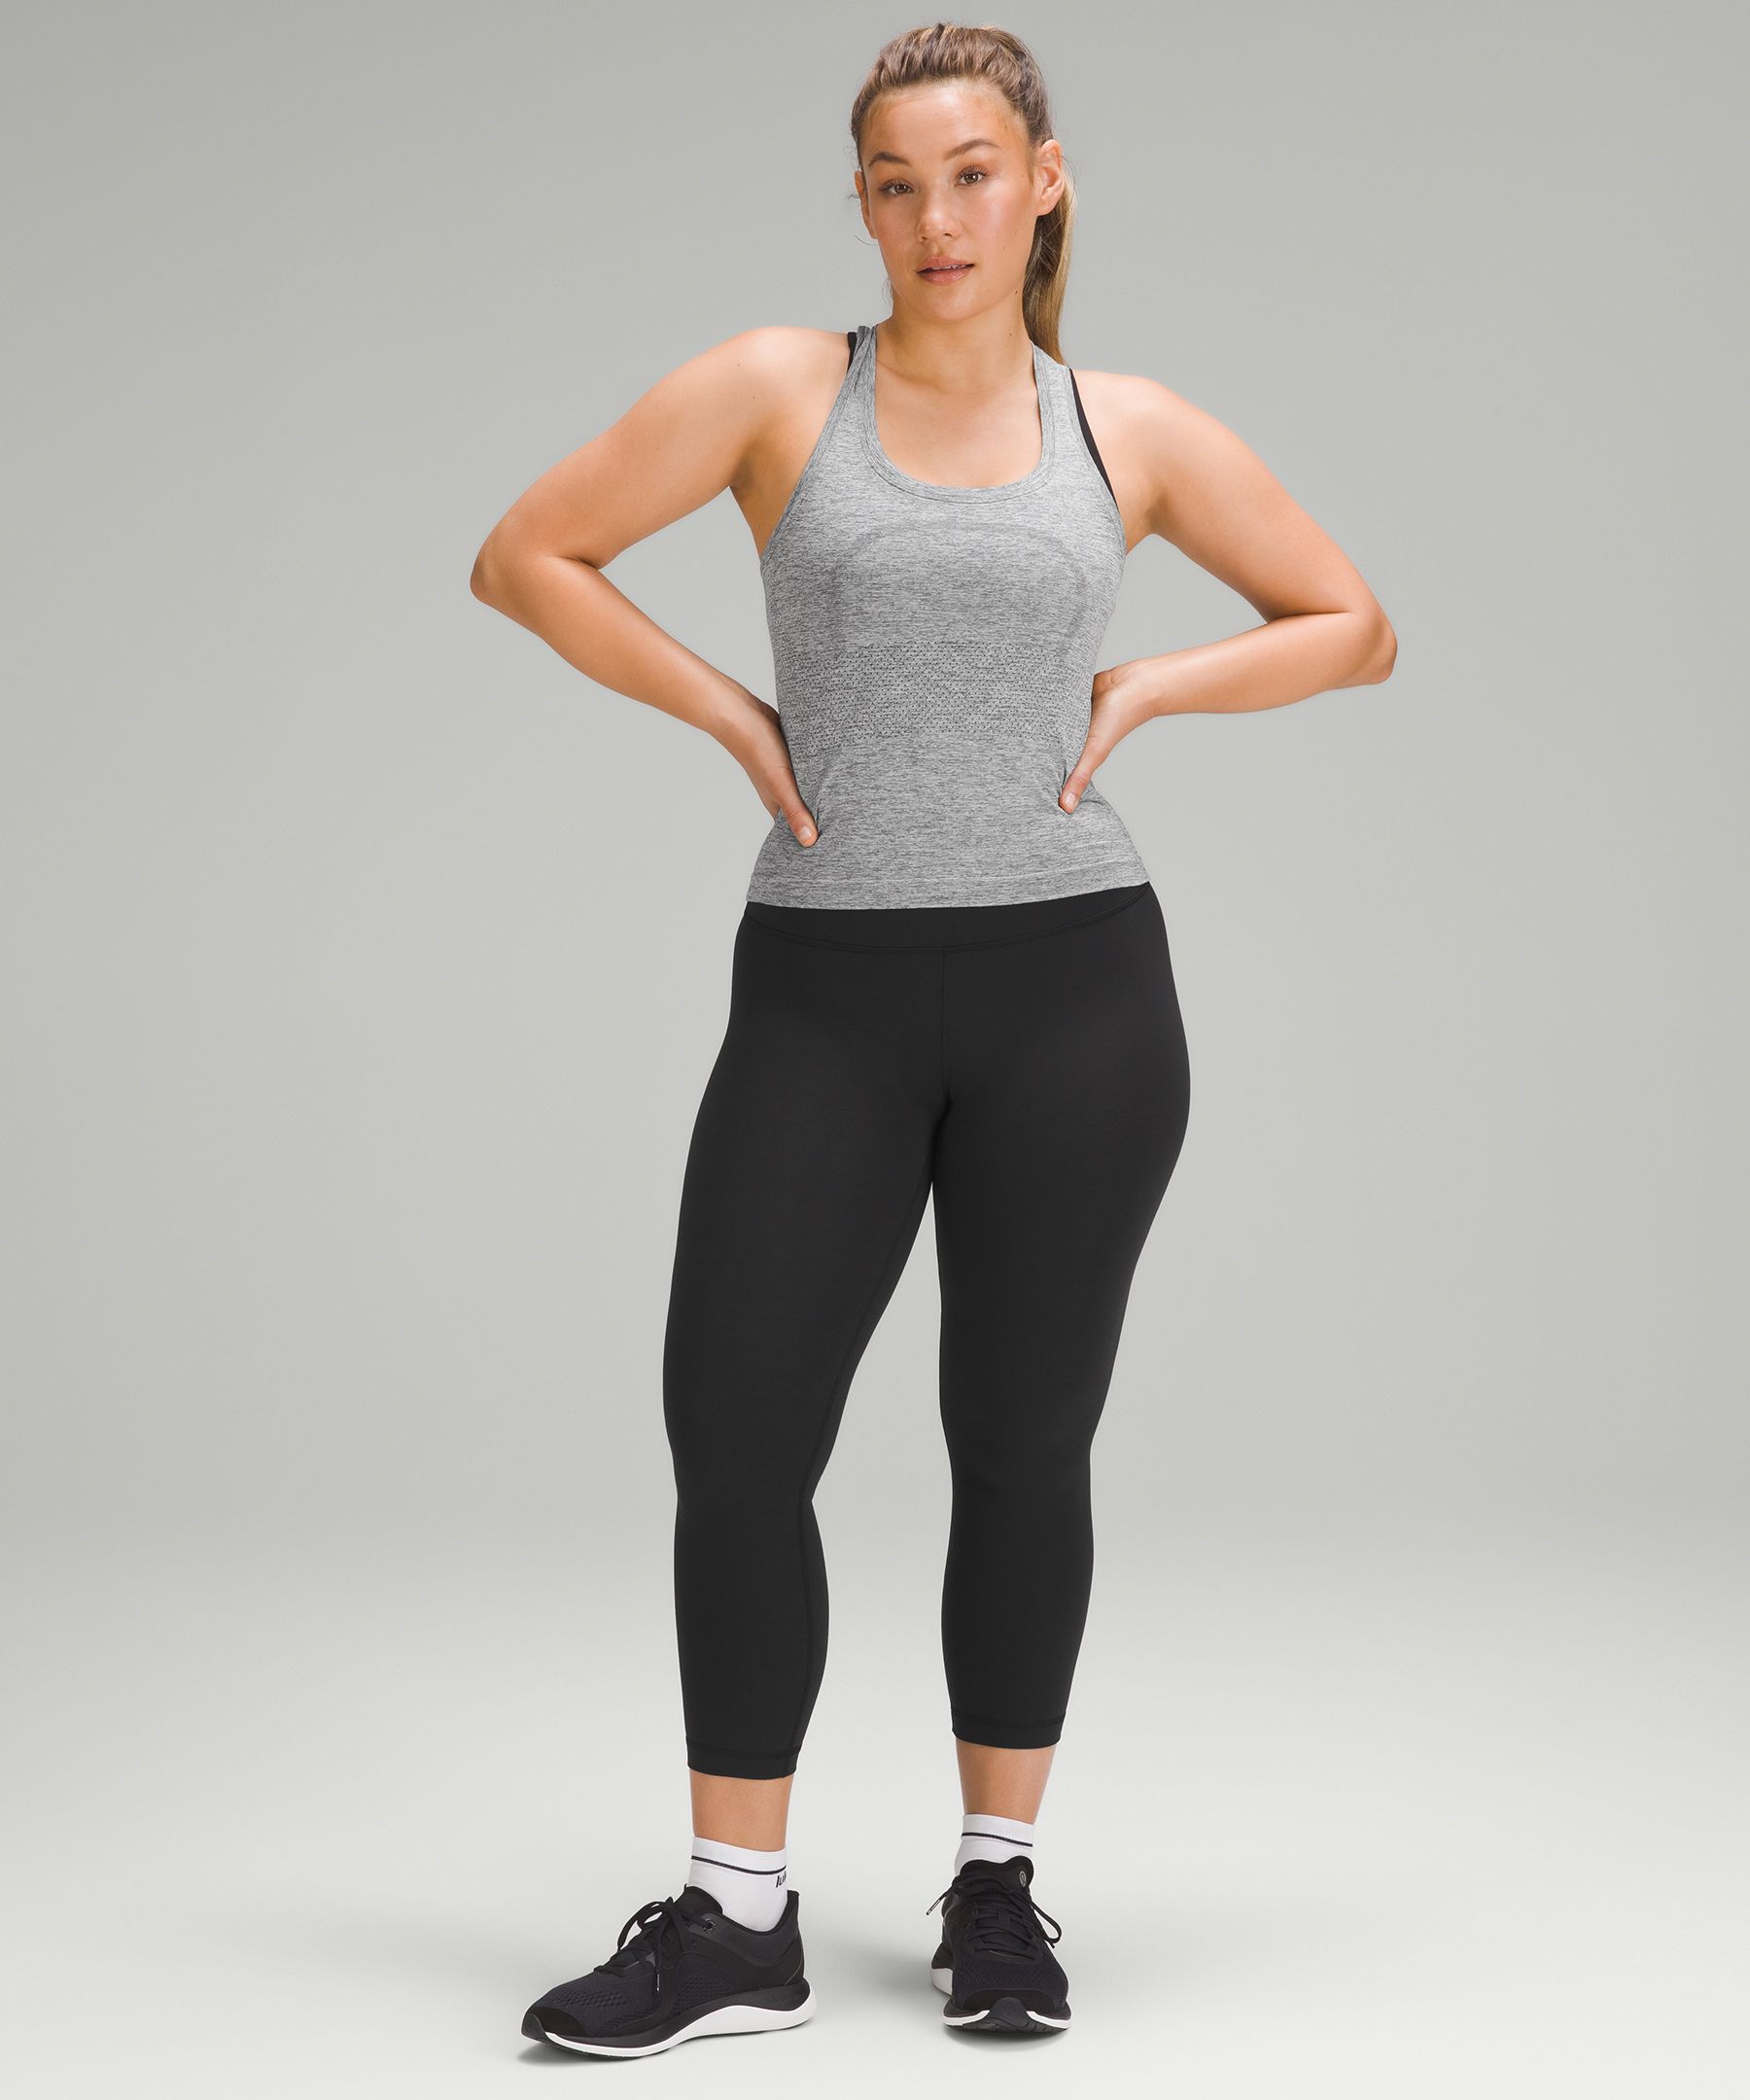 Lululemon Wunder Train High-Rise Tight 25 Contour fit UNBM size 6 NWT  Multiple - $69 (41% Off Retail) New With Tags - From MyArt